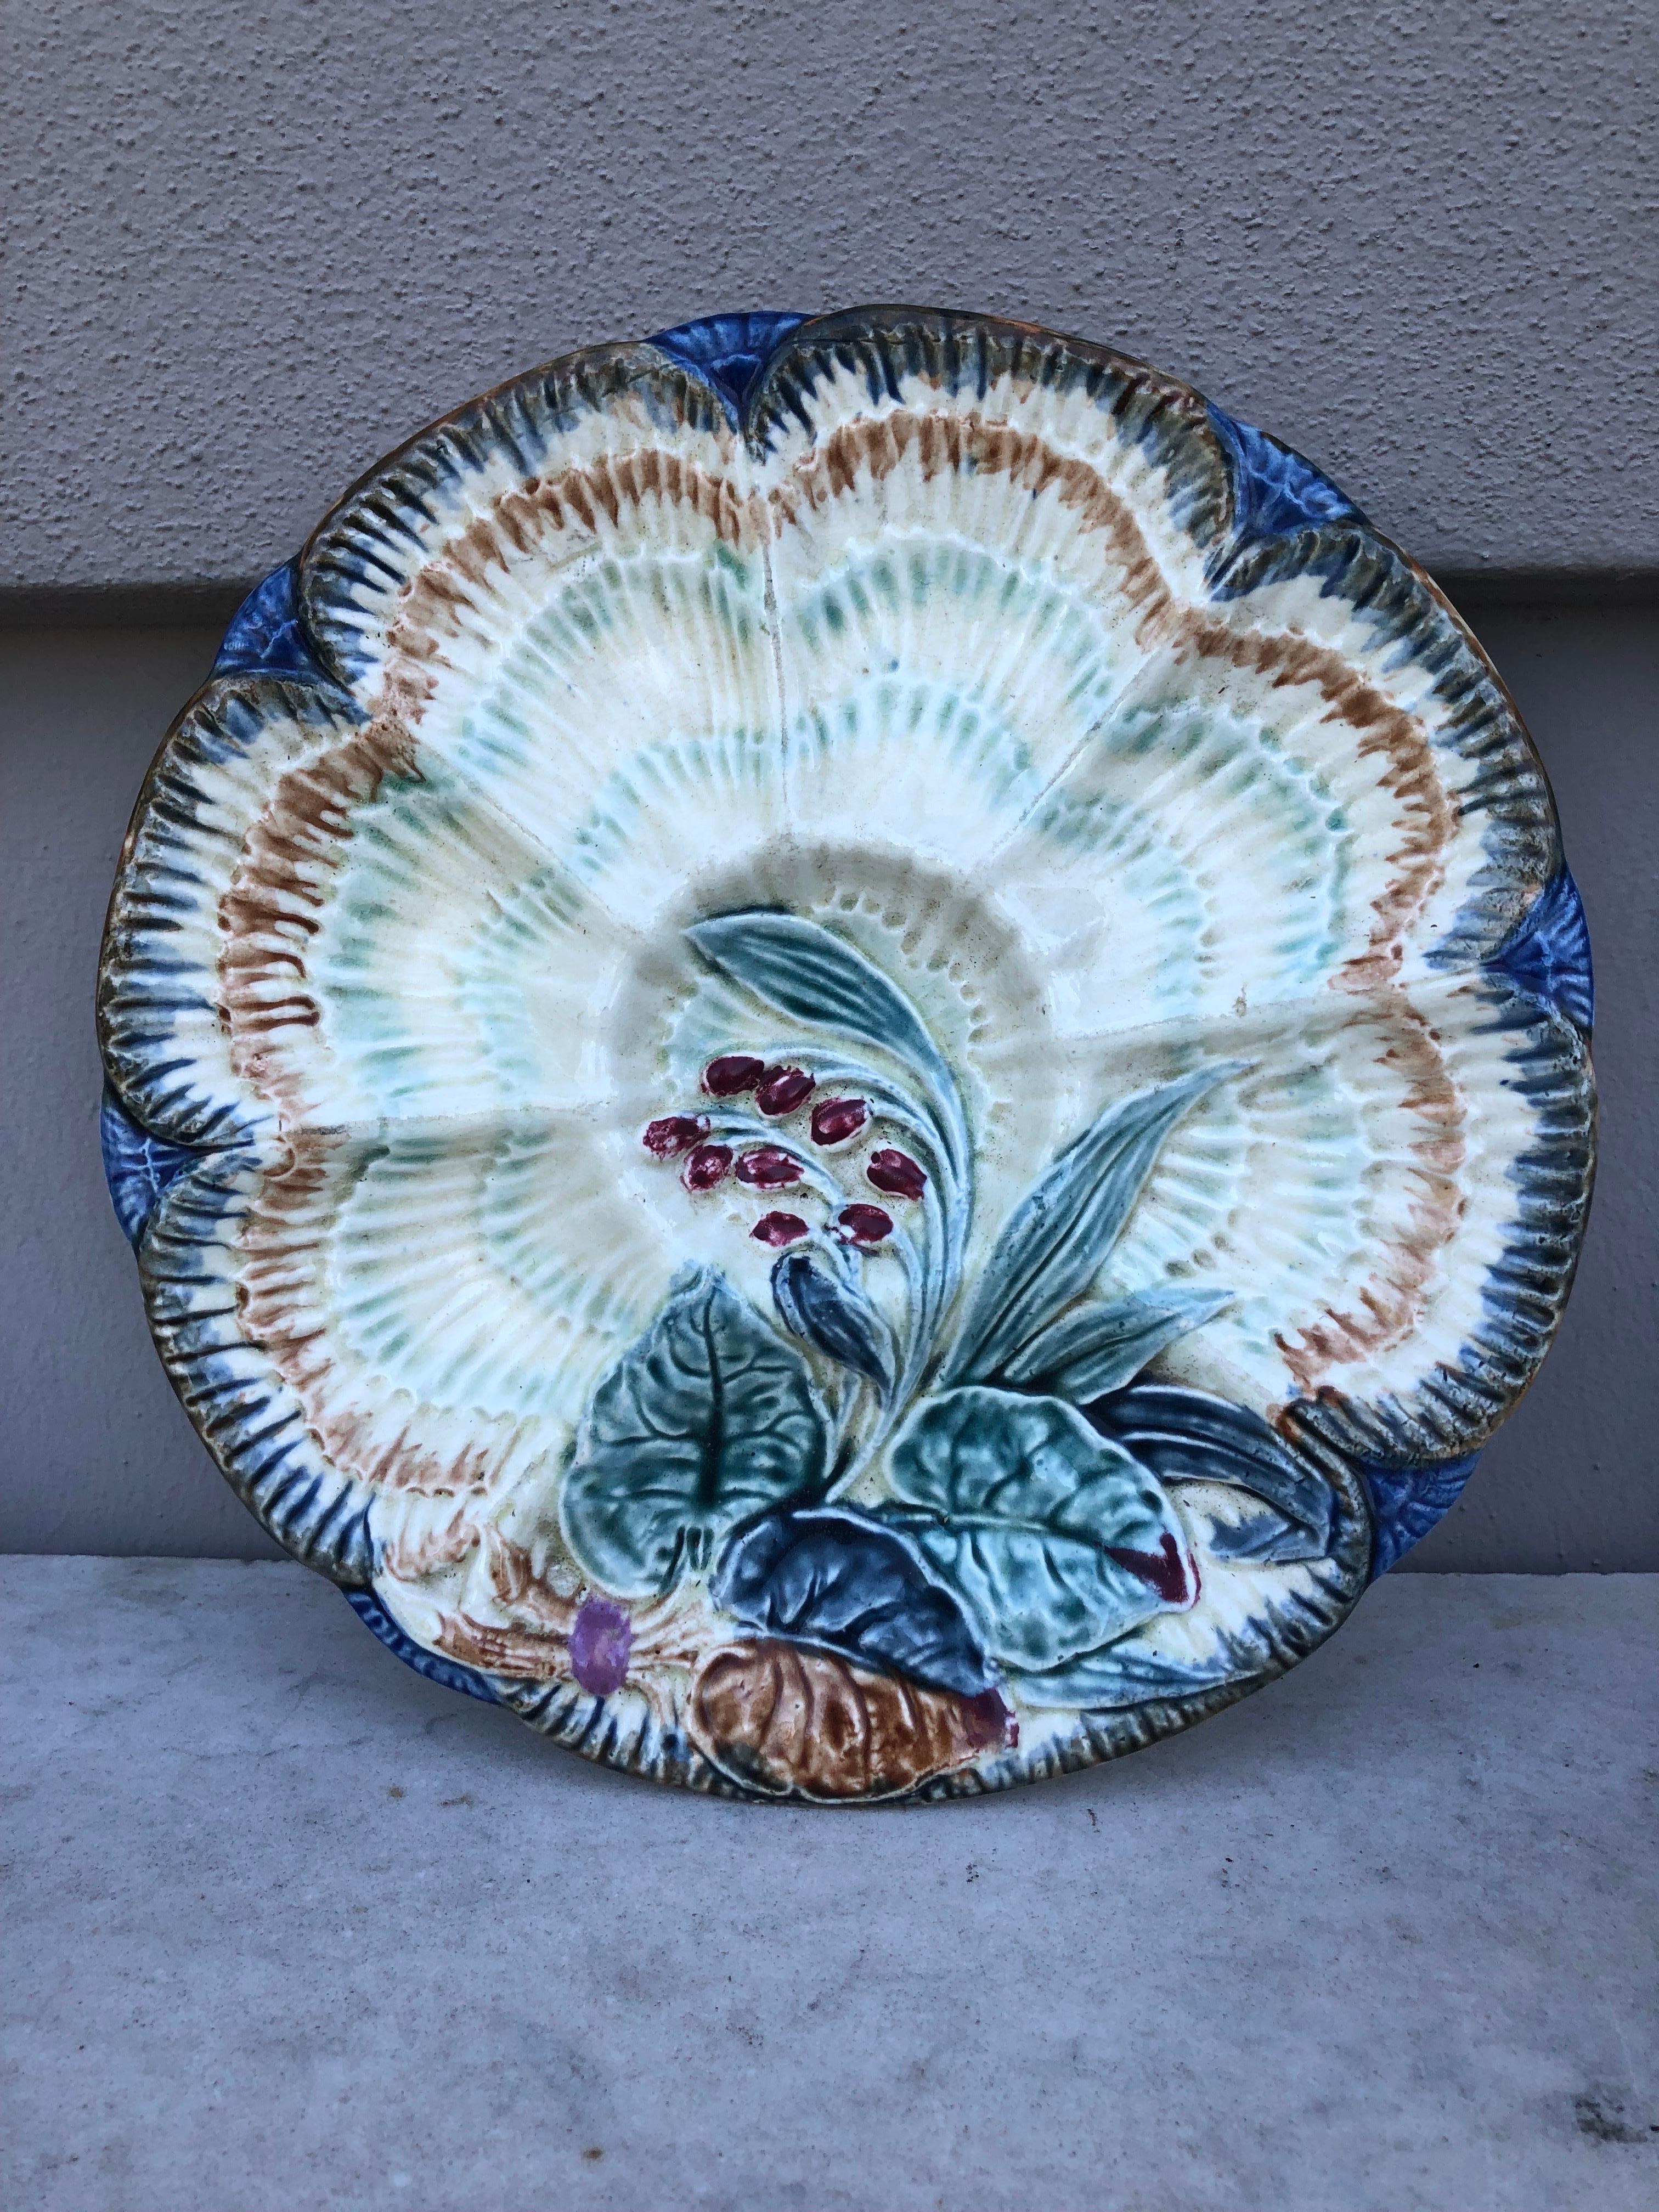 19th-century Majolica oyster plate Wasmuel (Belgium) decorated with flowers.